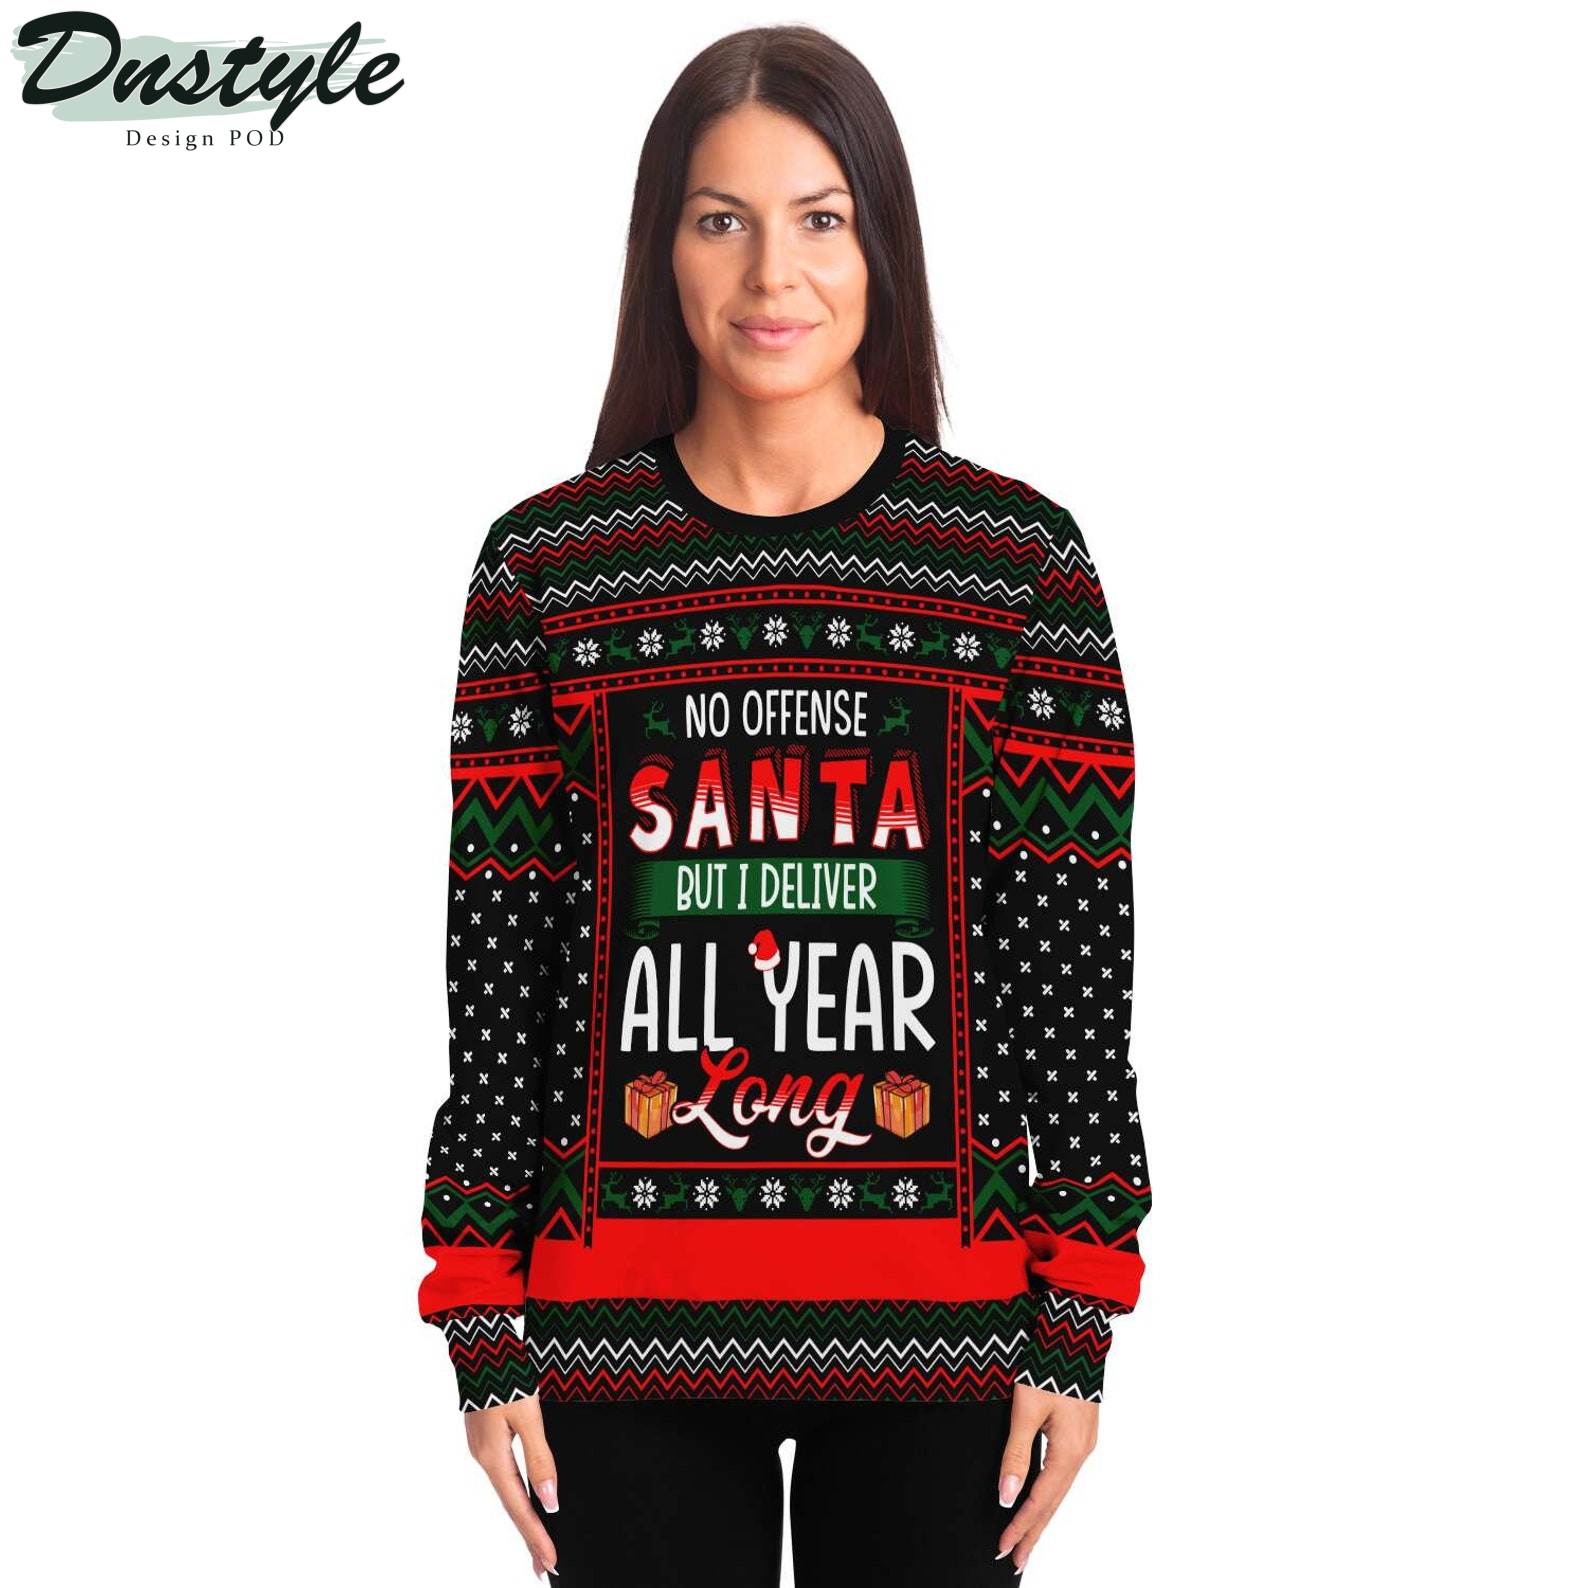 I Deliver All Year Long 2022 Ugly Christmas Sweater